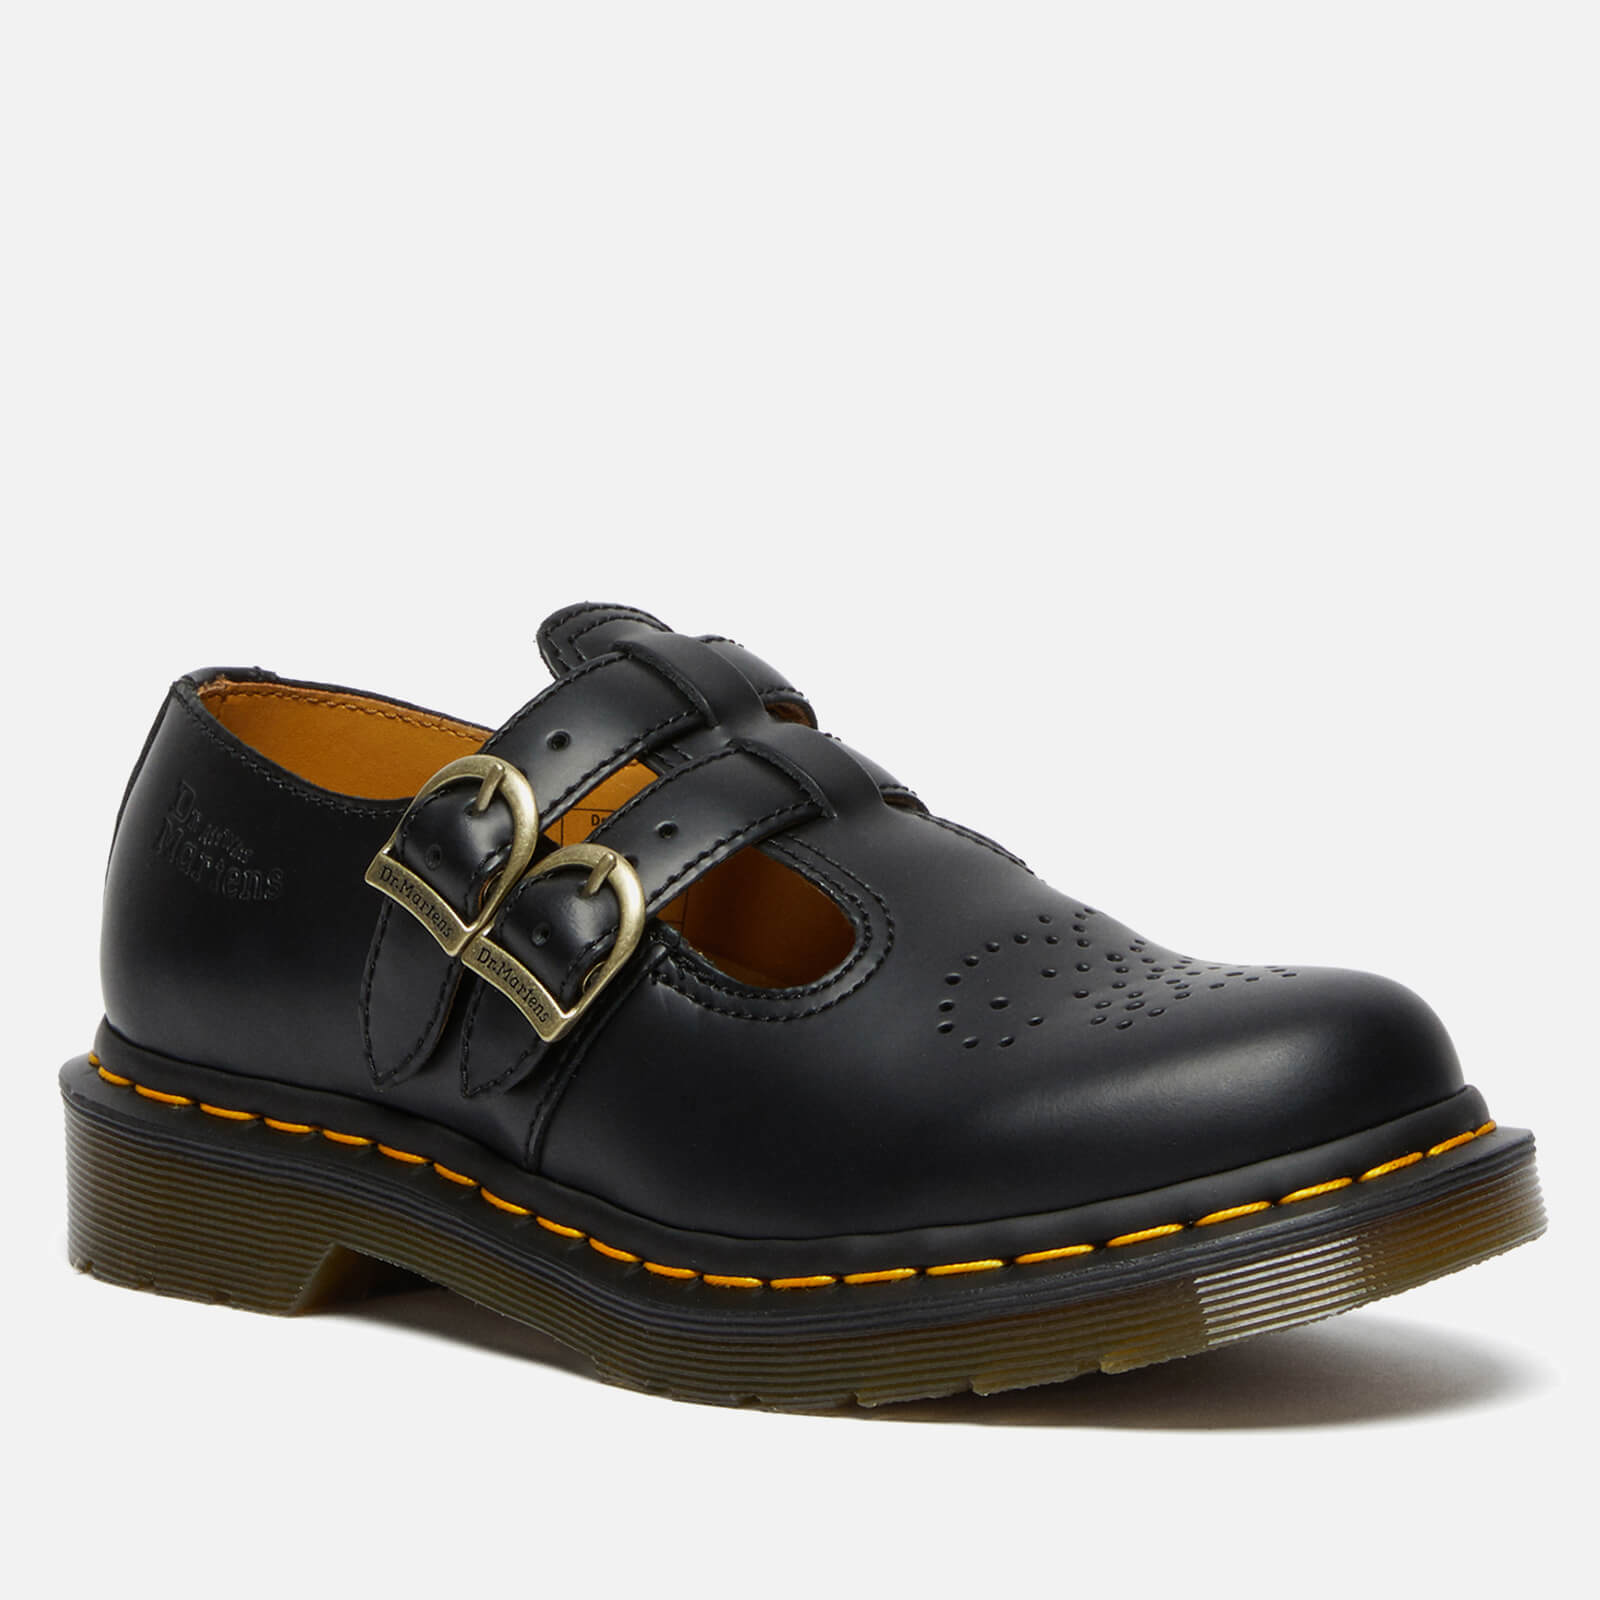 Dr. Martens Women’s 8065 Leather Mary-Jane Shoes